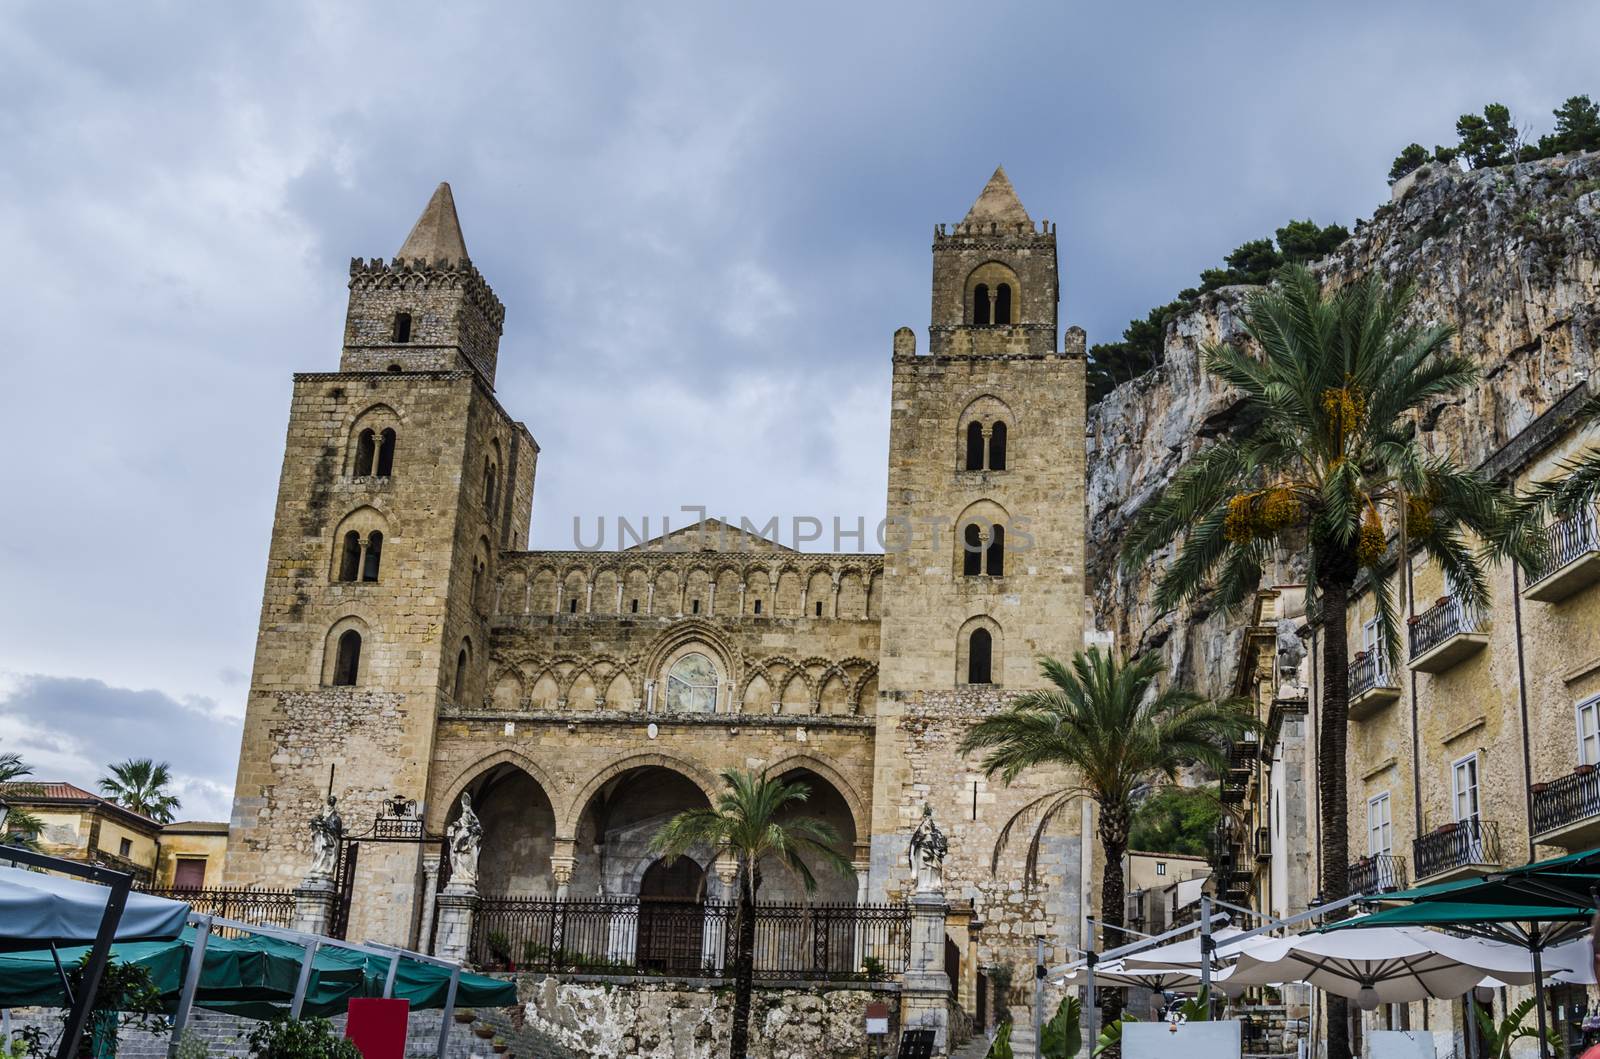 main church of cefalu with its particular architectural style buildings of the city and the famous rock formation of the city behind the church